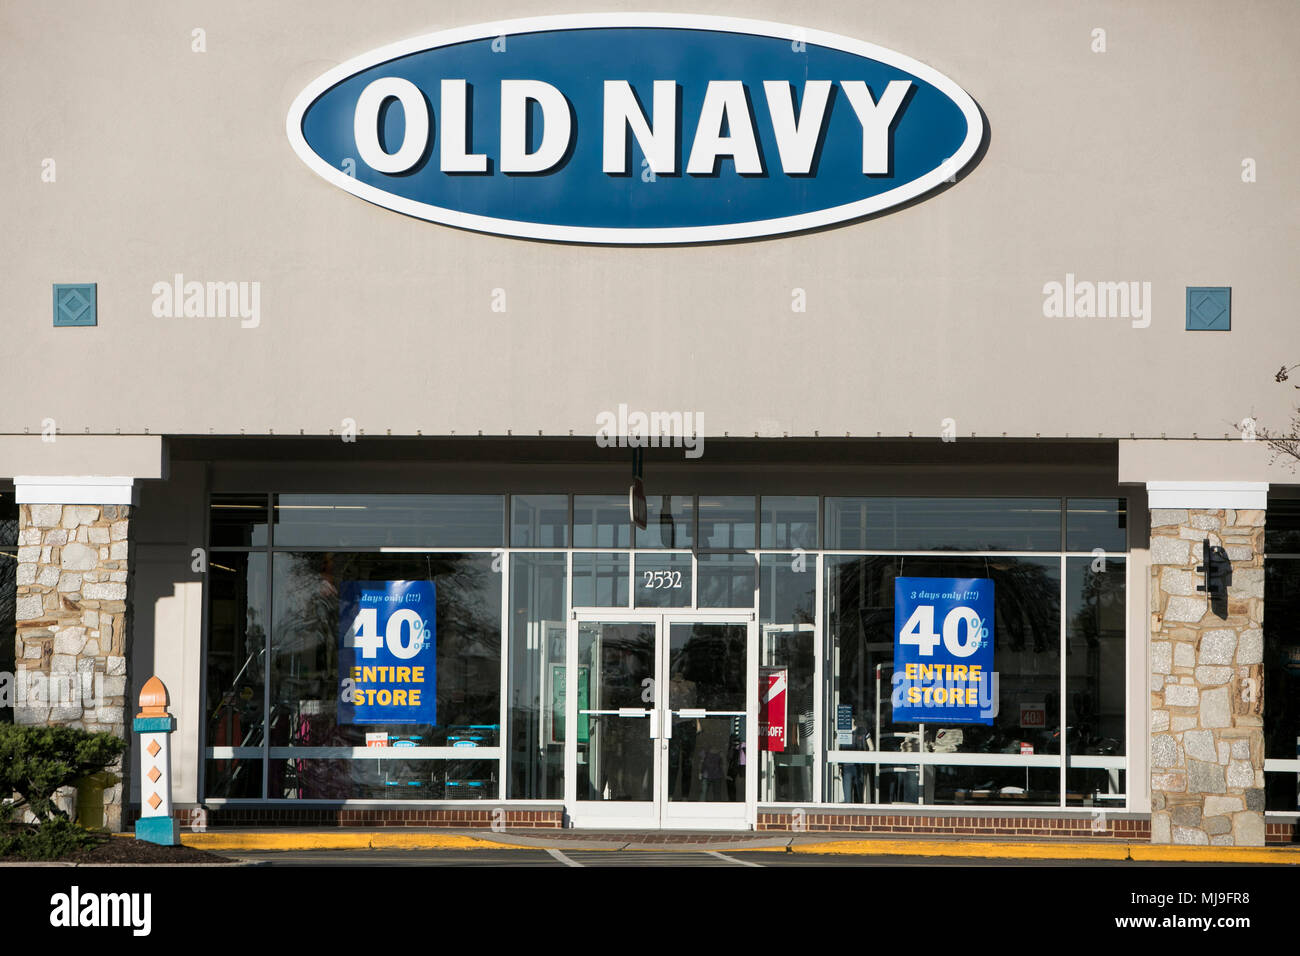 A logo sign outside of a Old Navy retail store in Annapolis, Maryland on April 29, 2018. Stock Photo